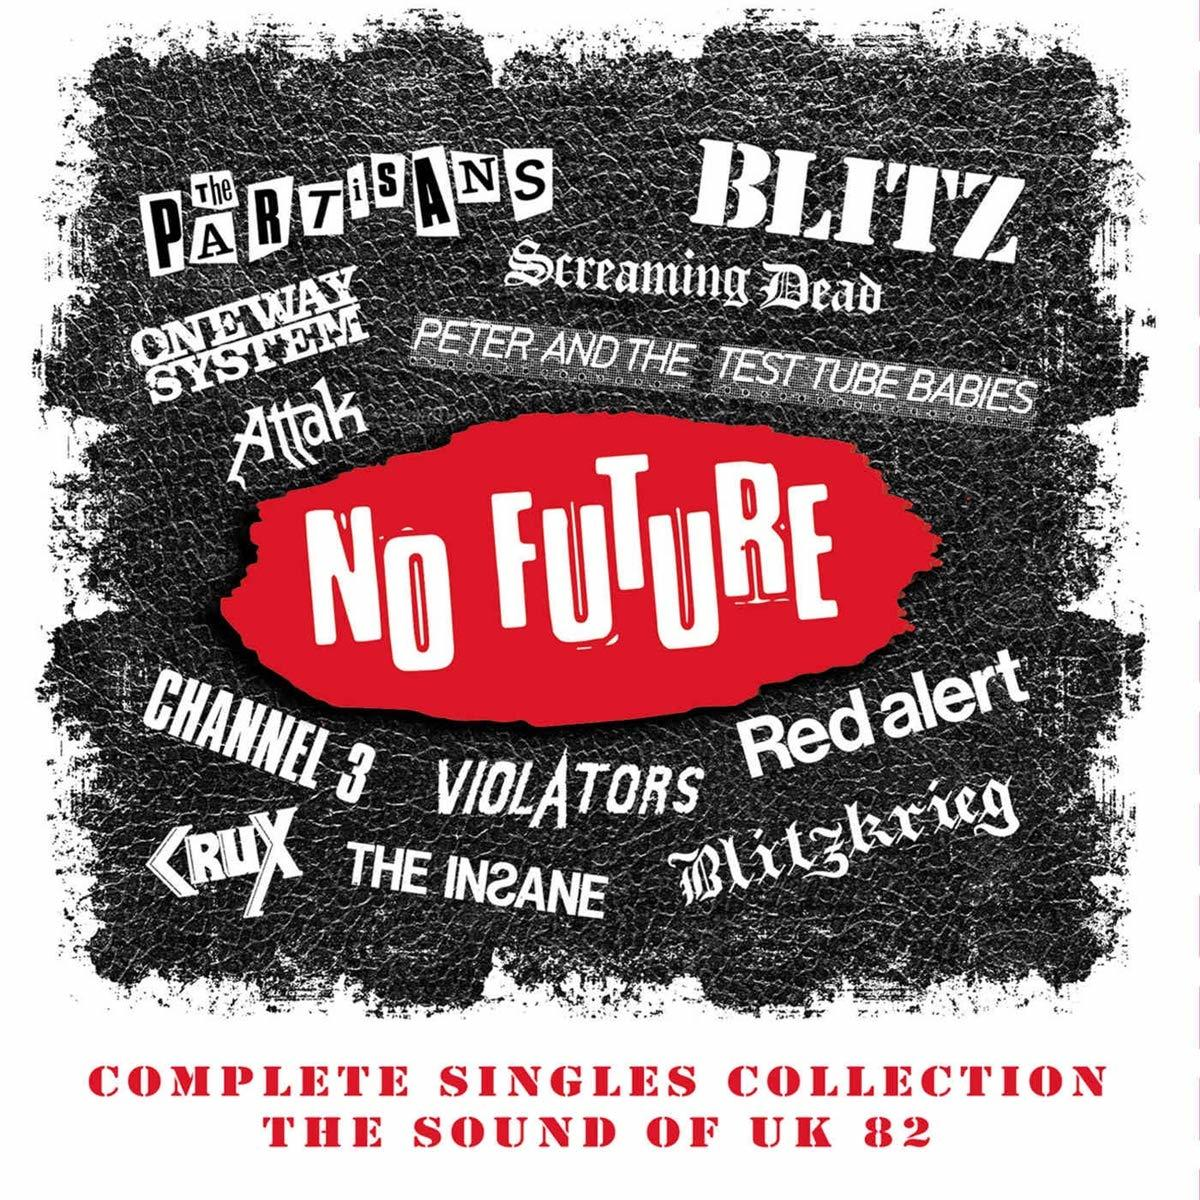 VARIOUS - Collection-The Future: Complete Singles No (CD) Sound 